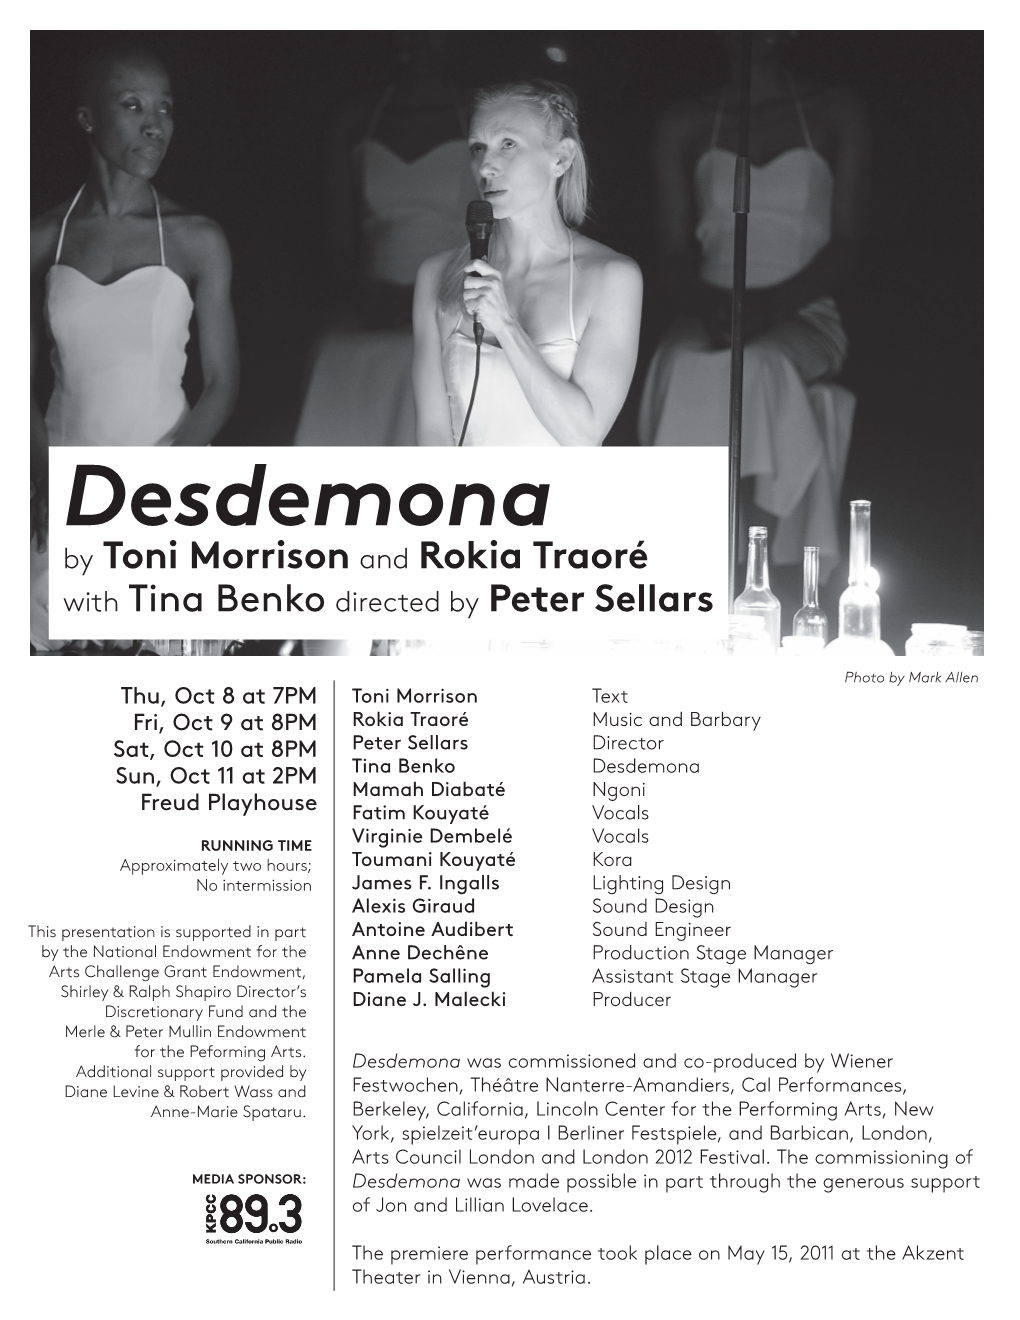 Desdemona by Toni Morrison and Rokia Traoré with Tina Benko Directed by Peter Sellars